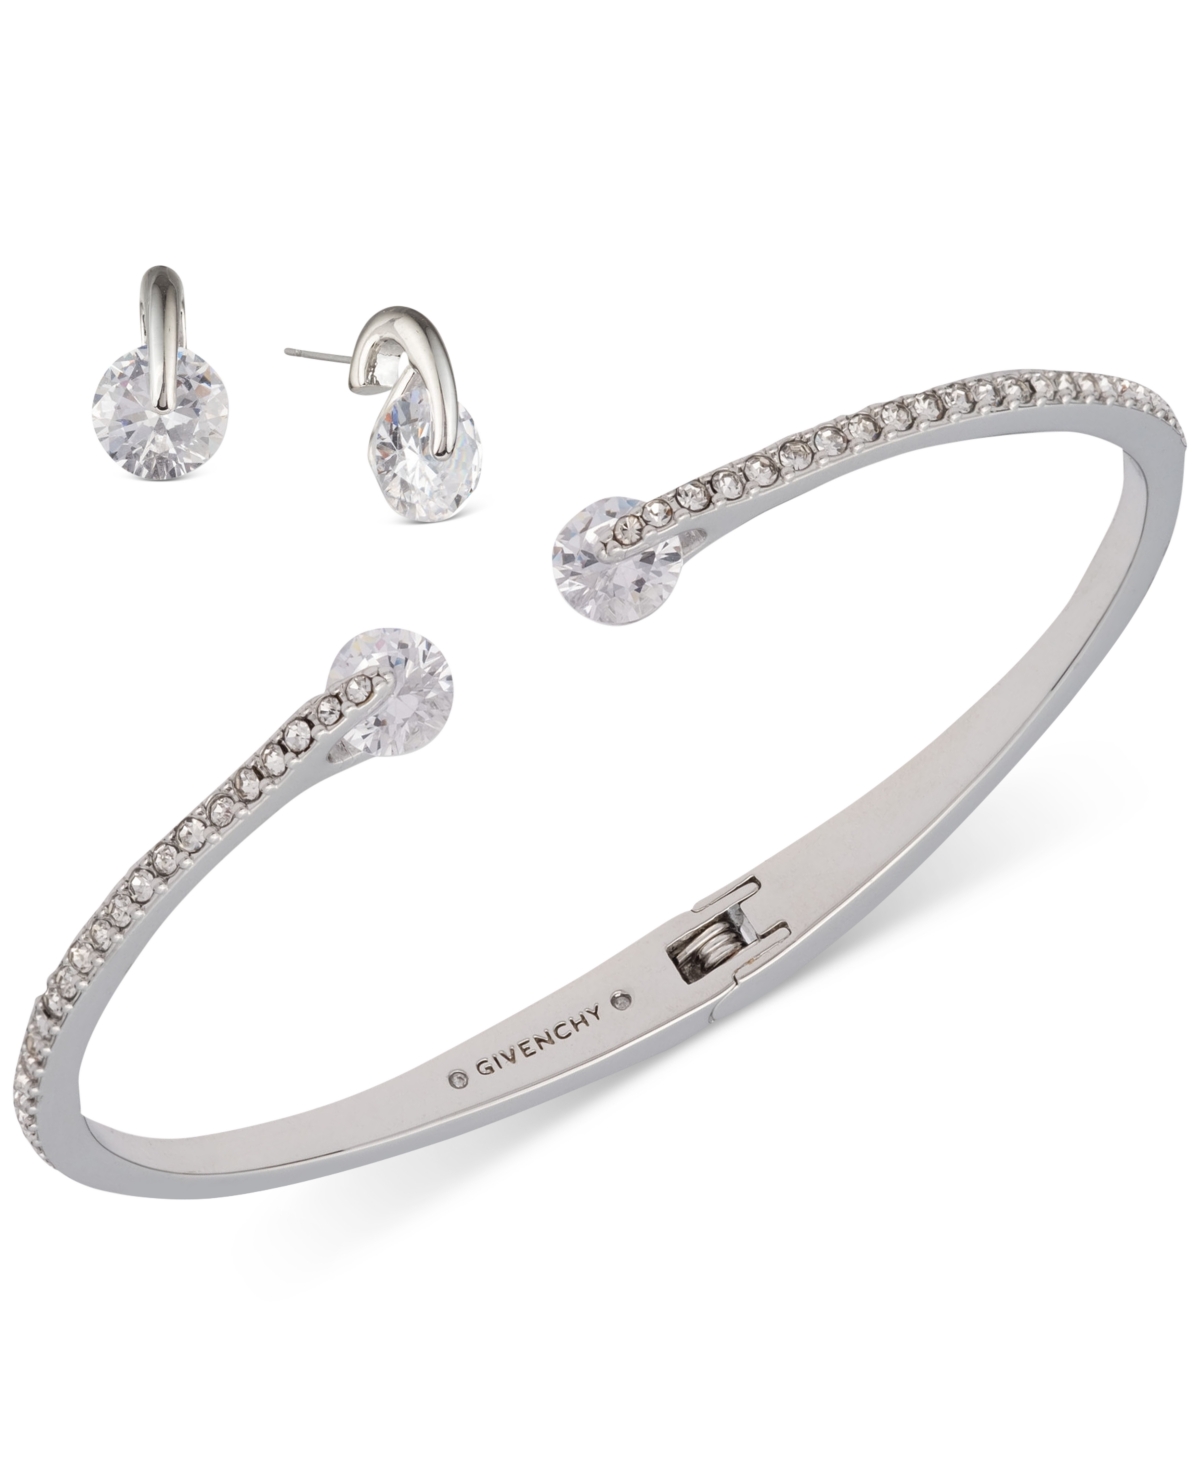 2-Pc. Set Color Floating Stone & Crystal Cuff Bangle Bracelet & Matching Stud Earrings - Silver